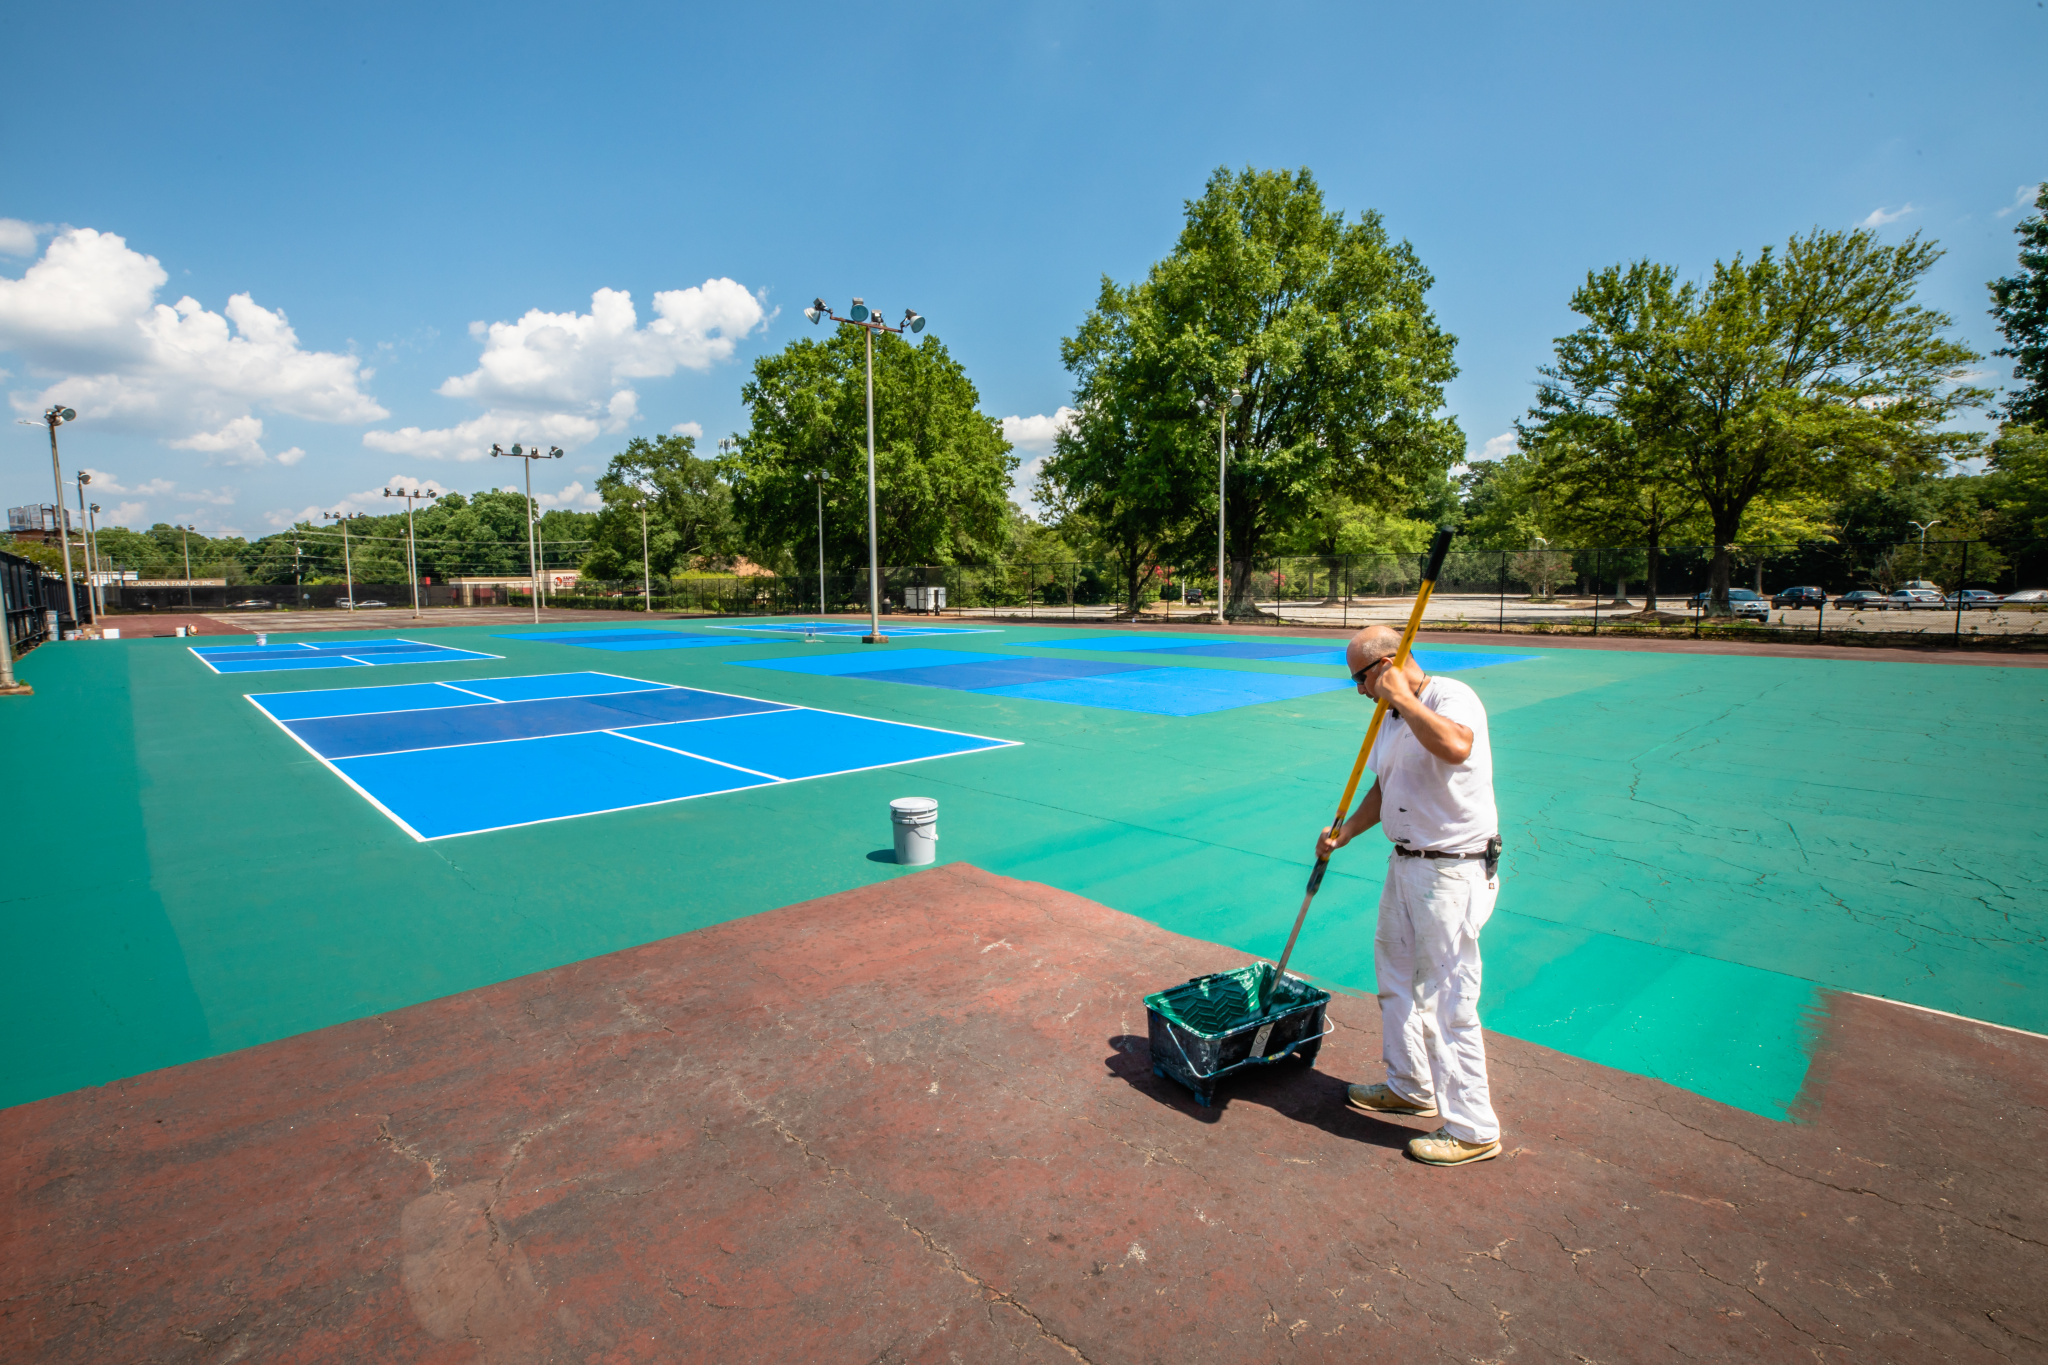 The old tennis courts are refurbished to become pickle ball courts